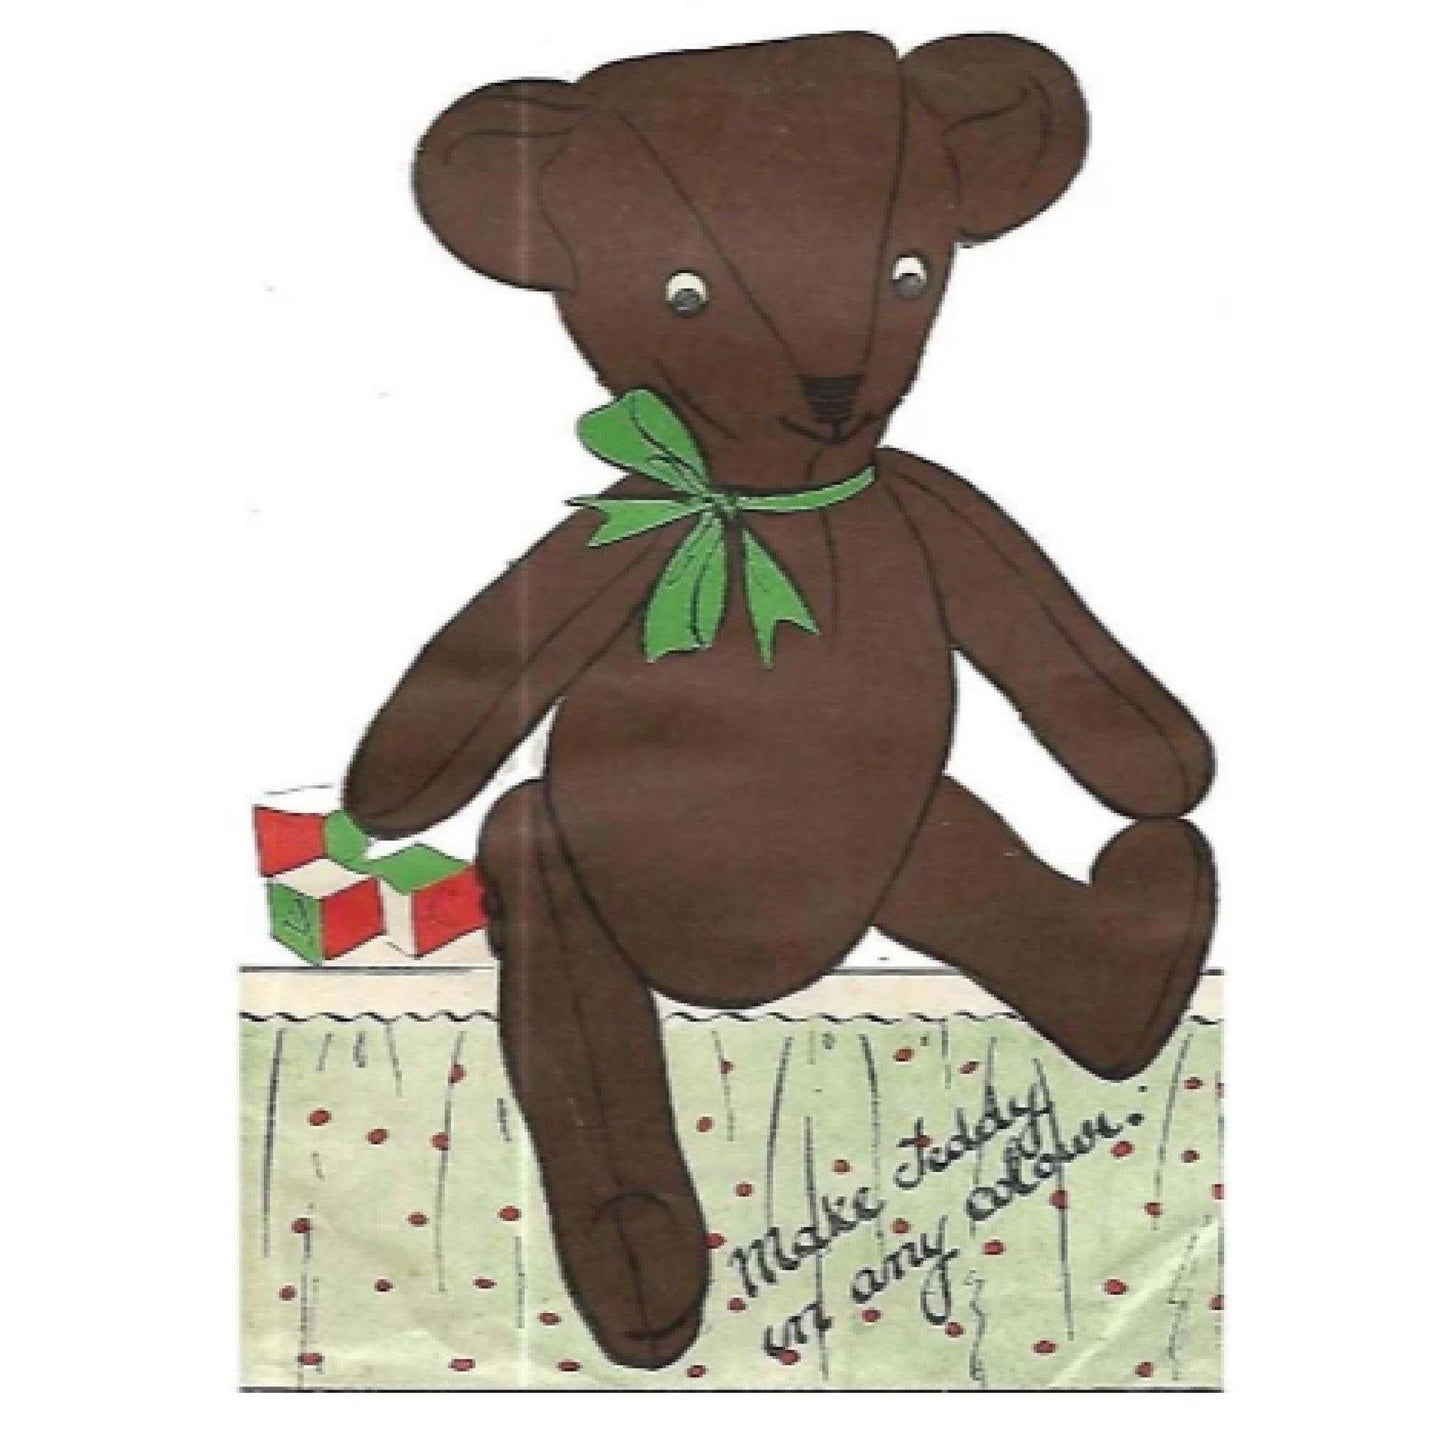 Vintage 1940s Sewing Pattern, Child's Teddy Bear Soft Toy PDF Download - Vintage Sewing Pattern Company